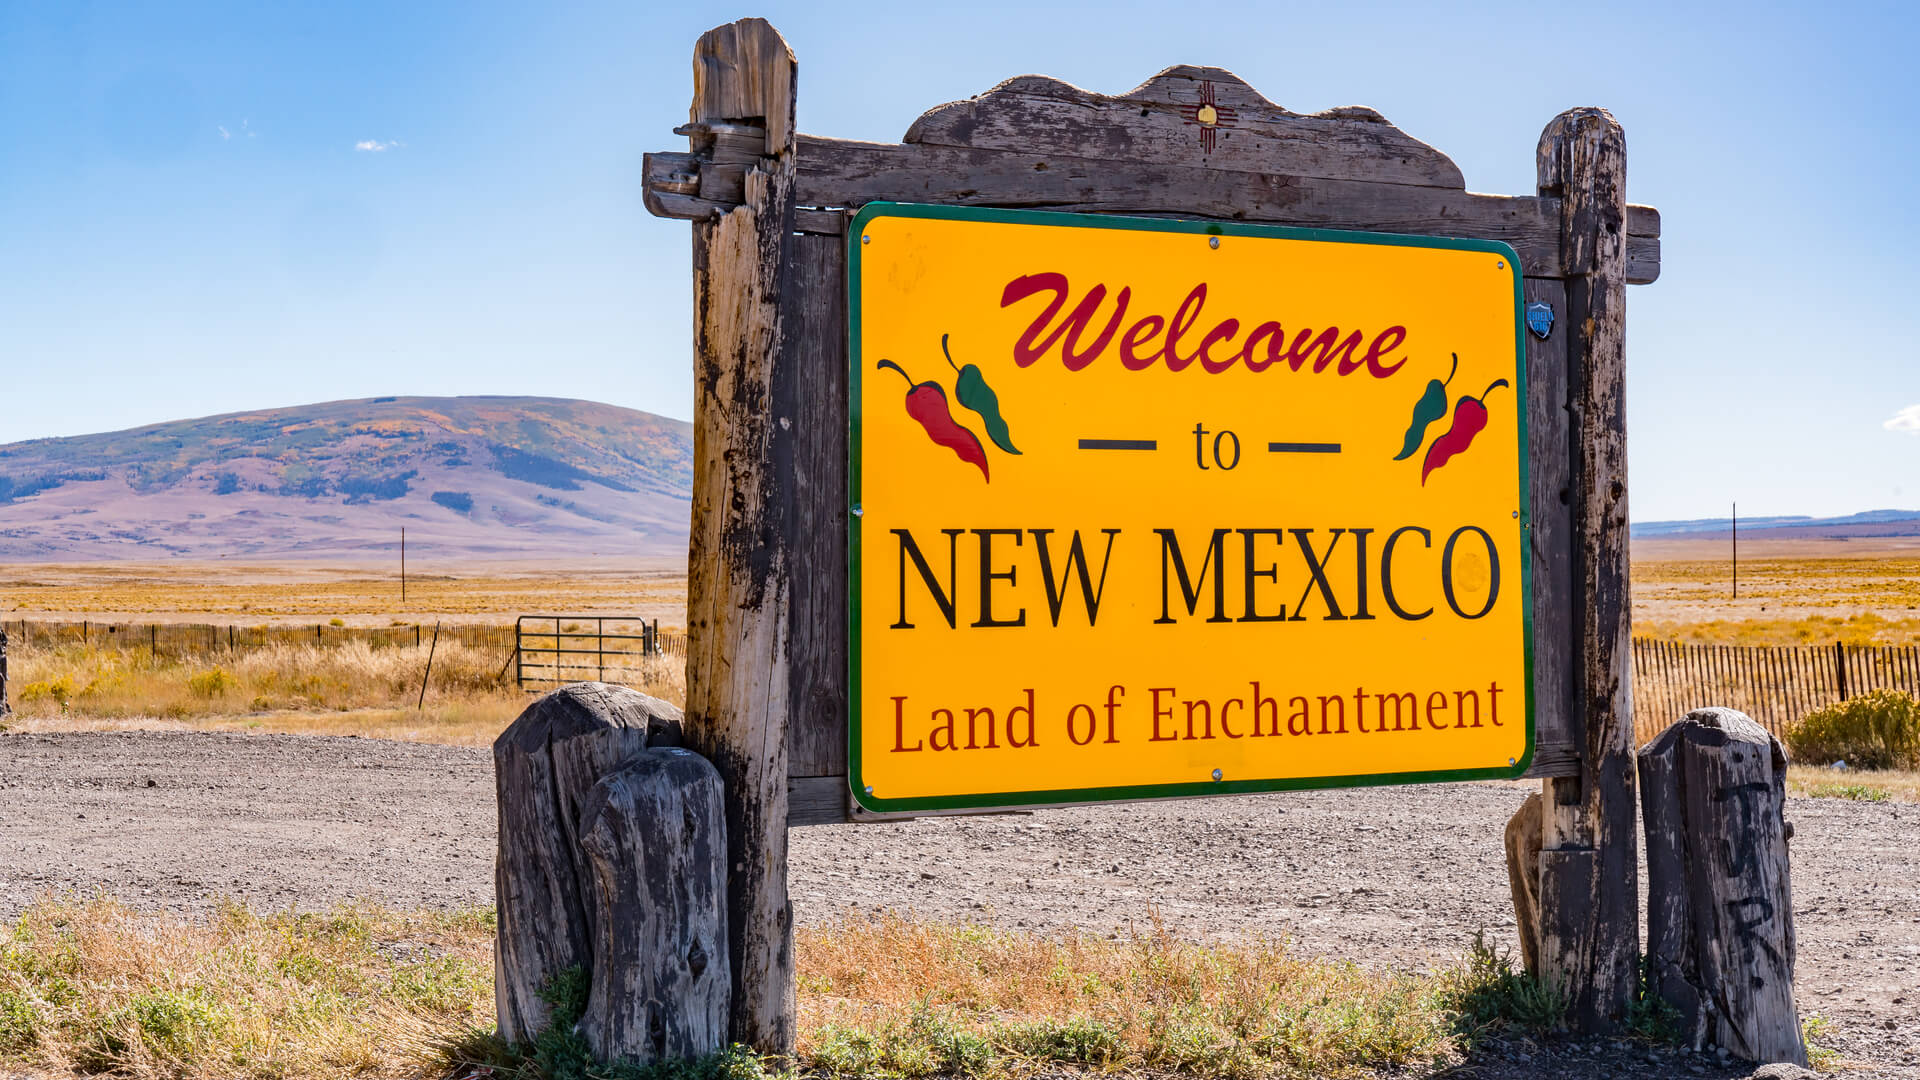 An orange sign welcoming visitors to New Mexico